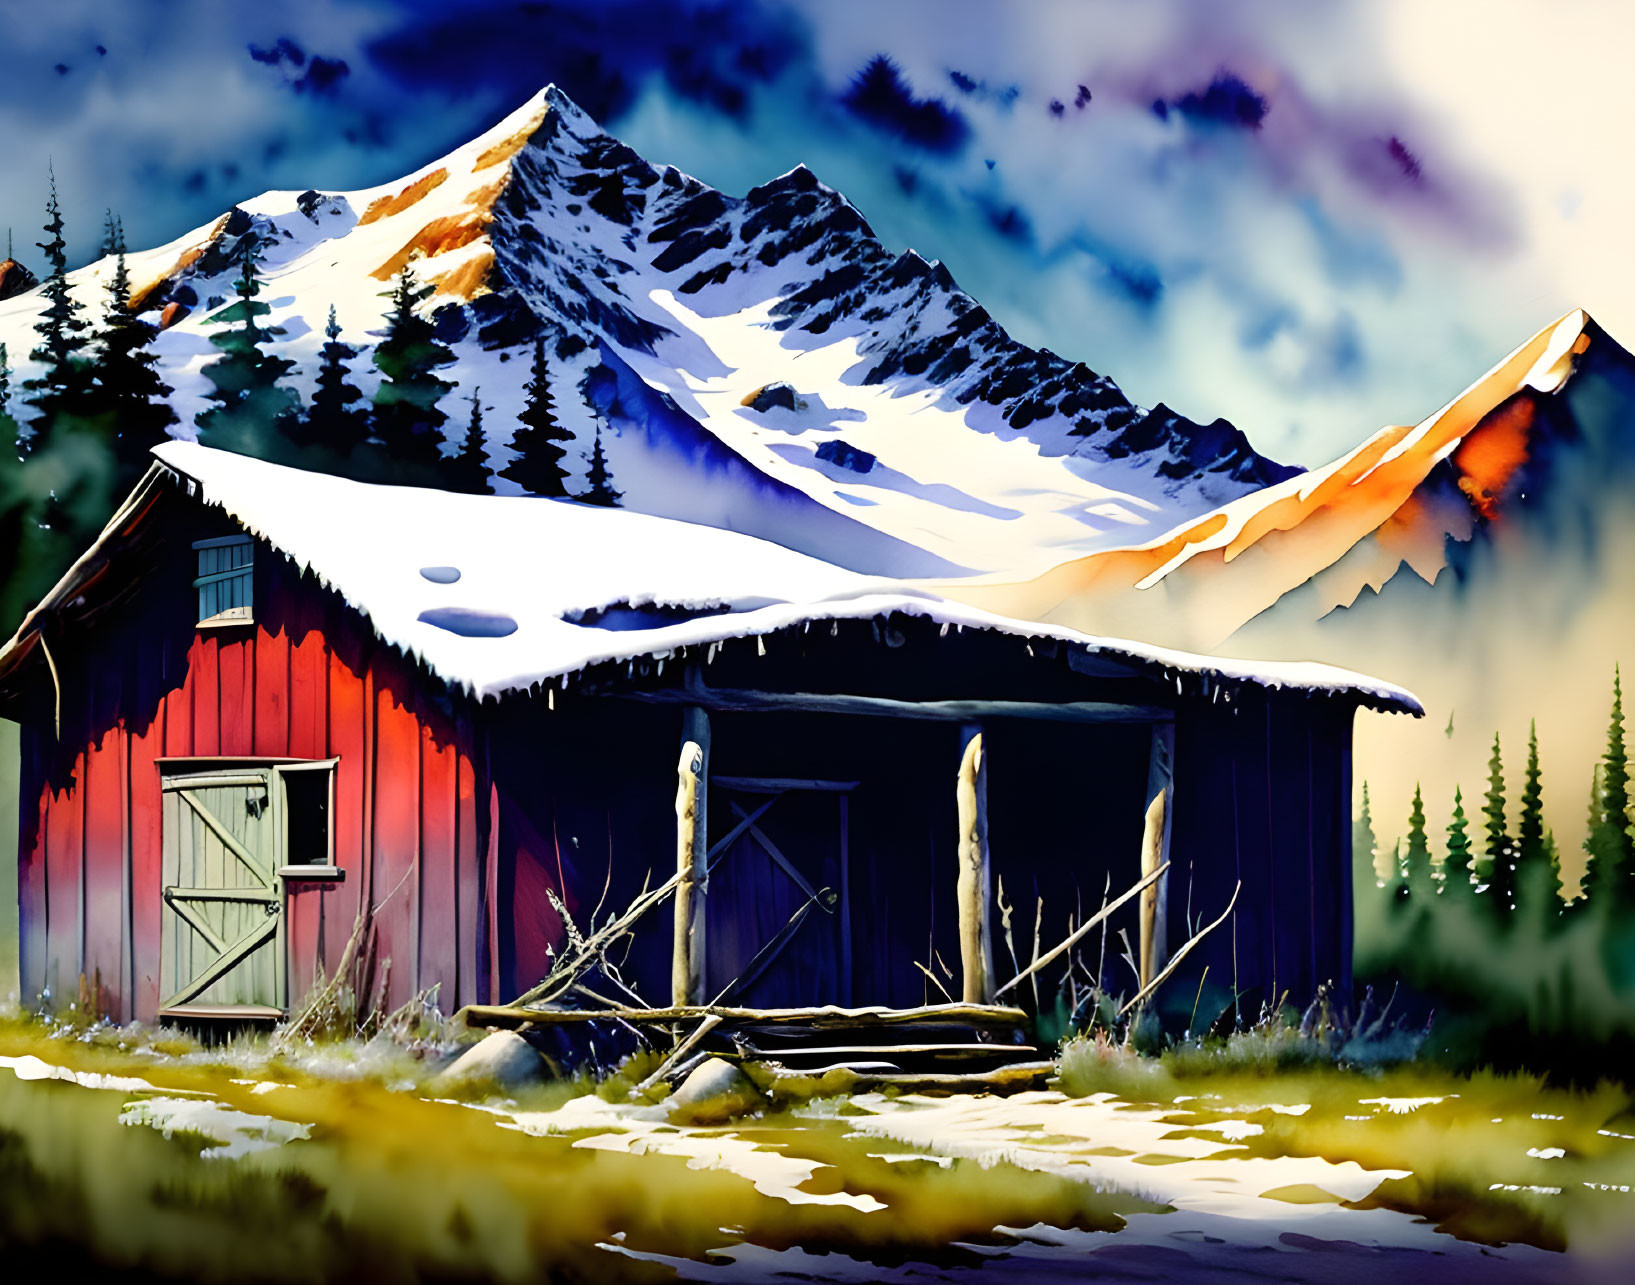 Snowy mountain cabin illustration with red roof and evergreen trees